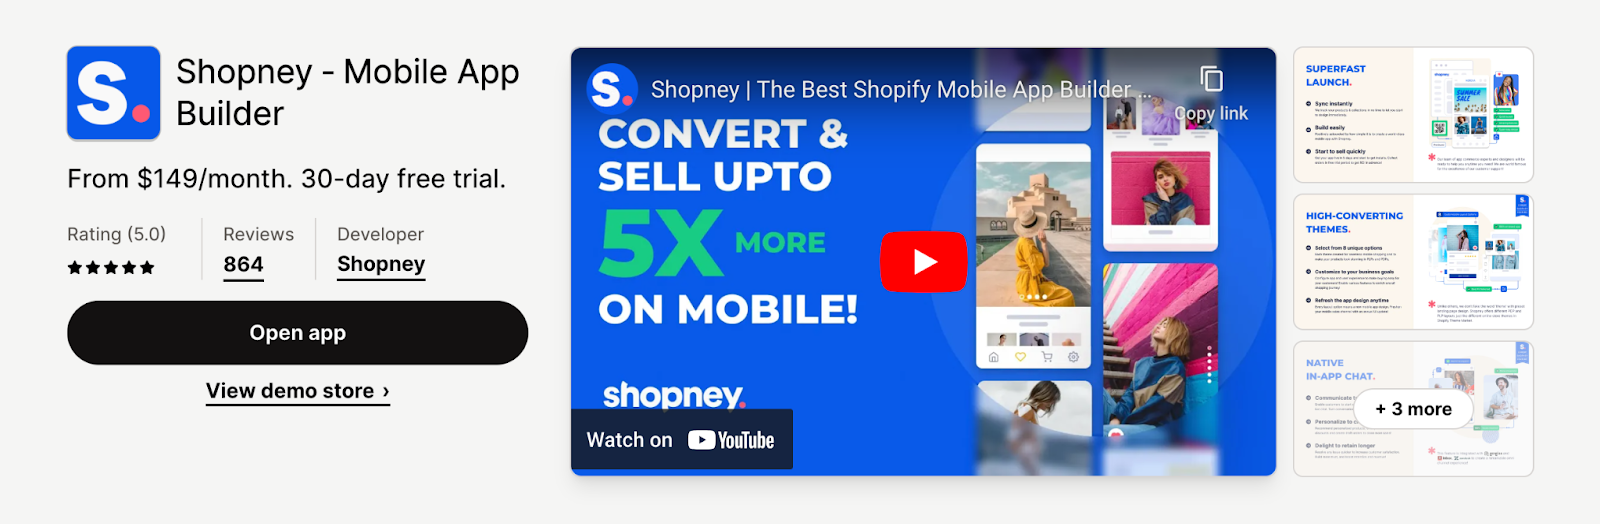 shopify app store listing page of Shopney